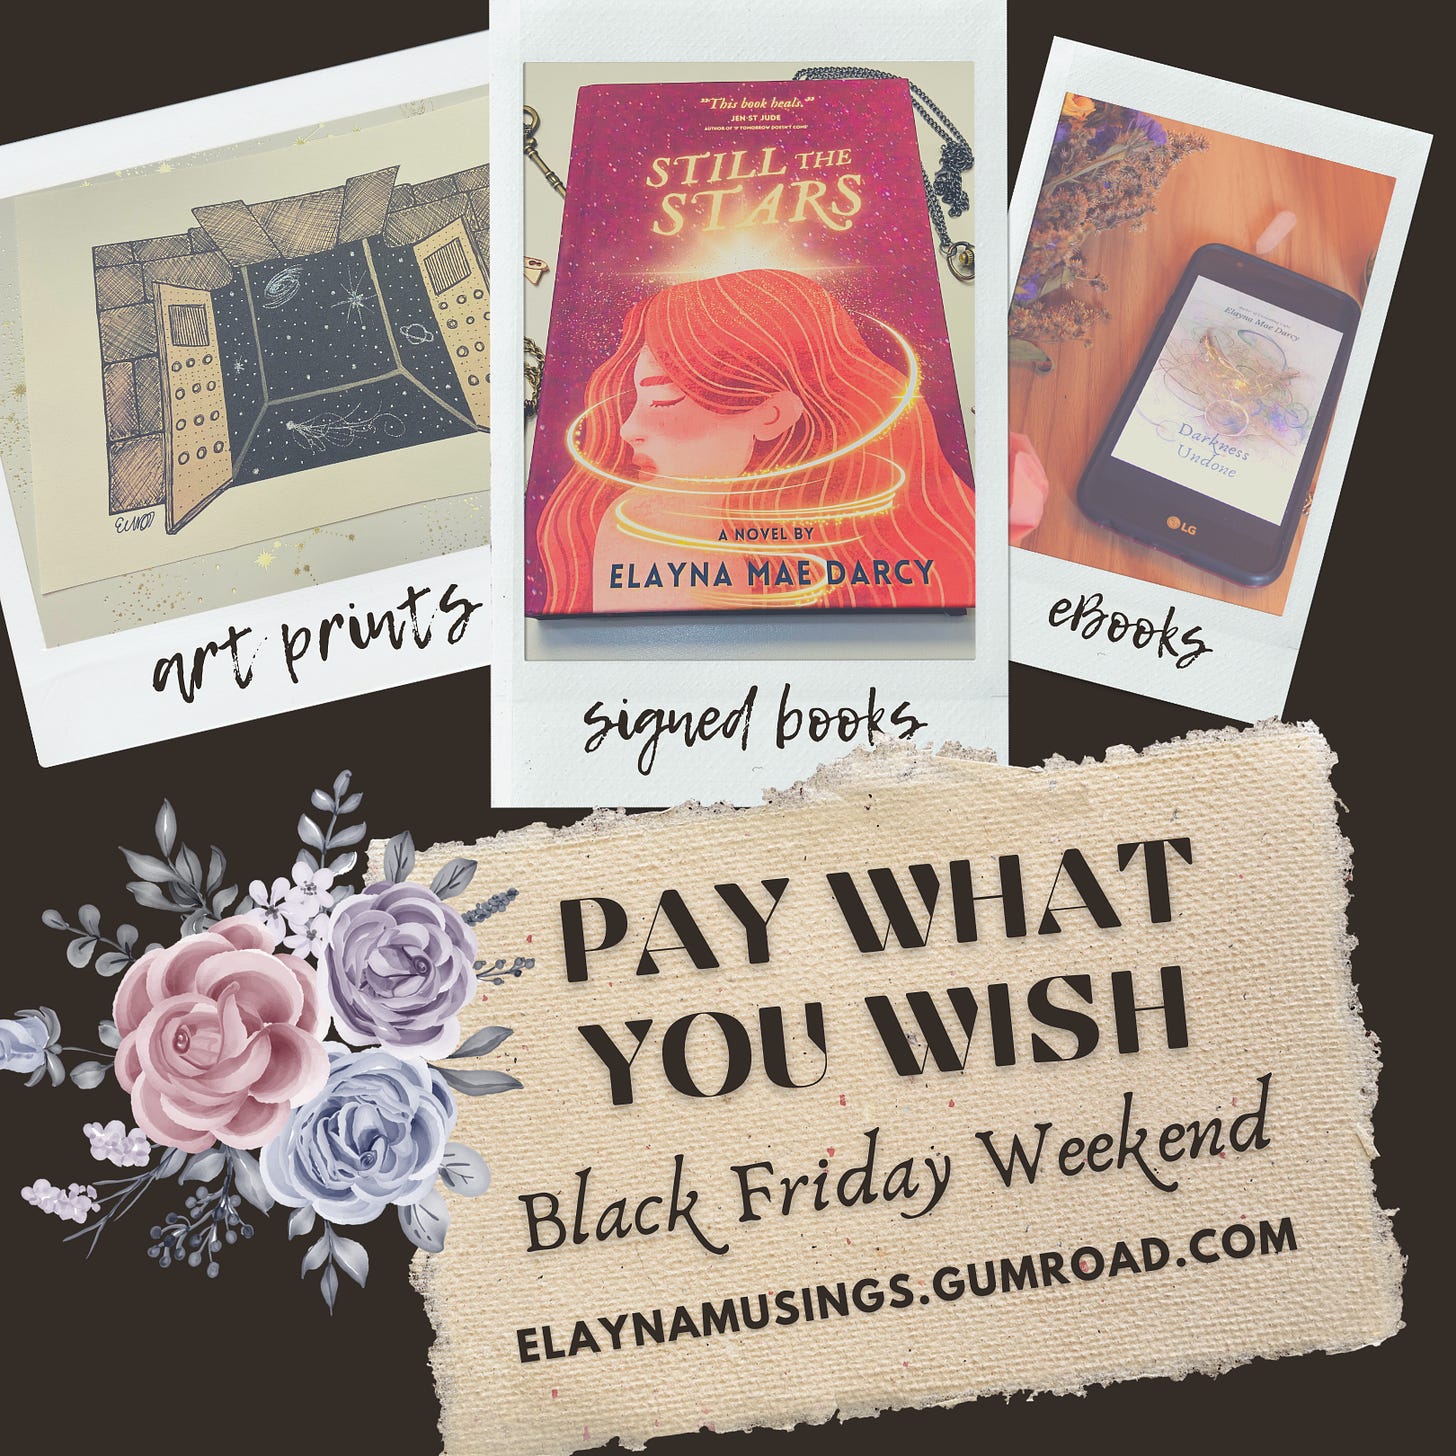 A promo graphic advertising PAY WHAT YOU WISH during Black Friday Weekend on elaynmusings.gumroad.com, featuring polaroid images of a starry art print, a hardback of the book STILL THE STARS, and a phone with an eBook of DARKNESS UNDONE open on it